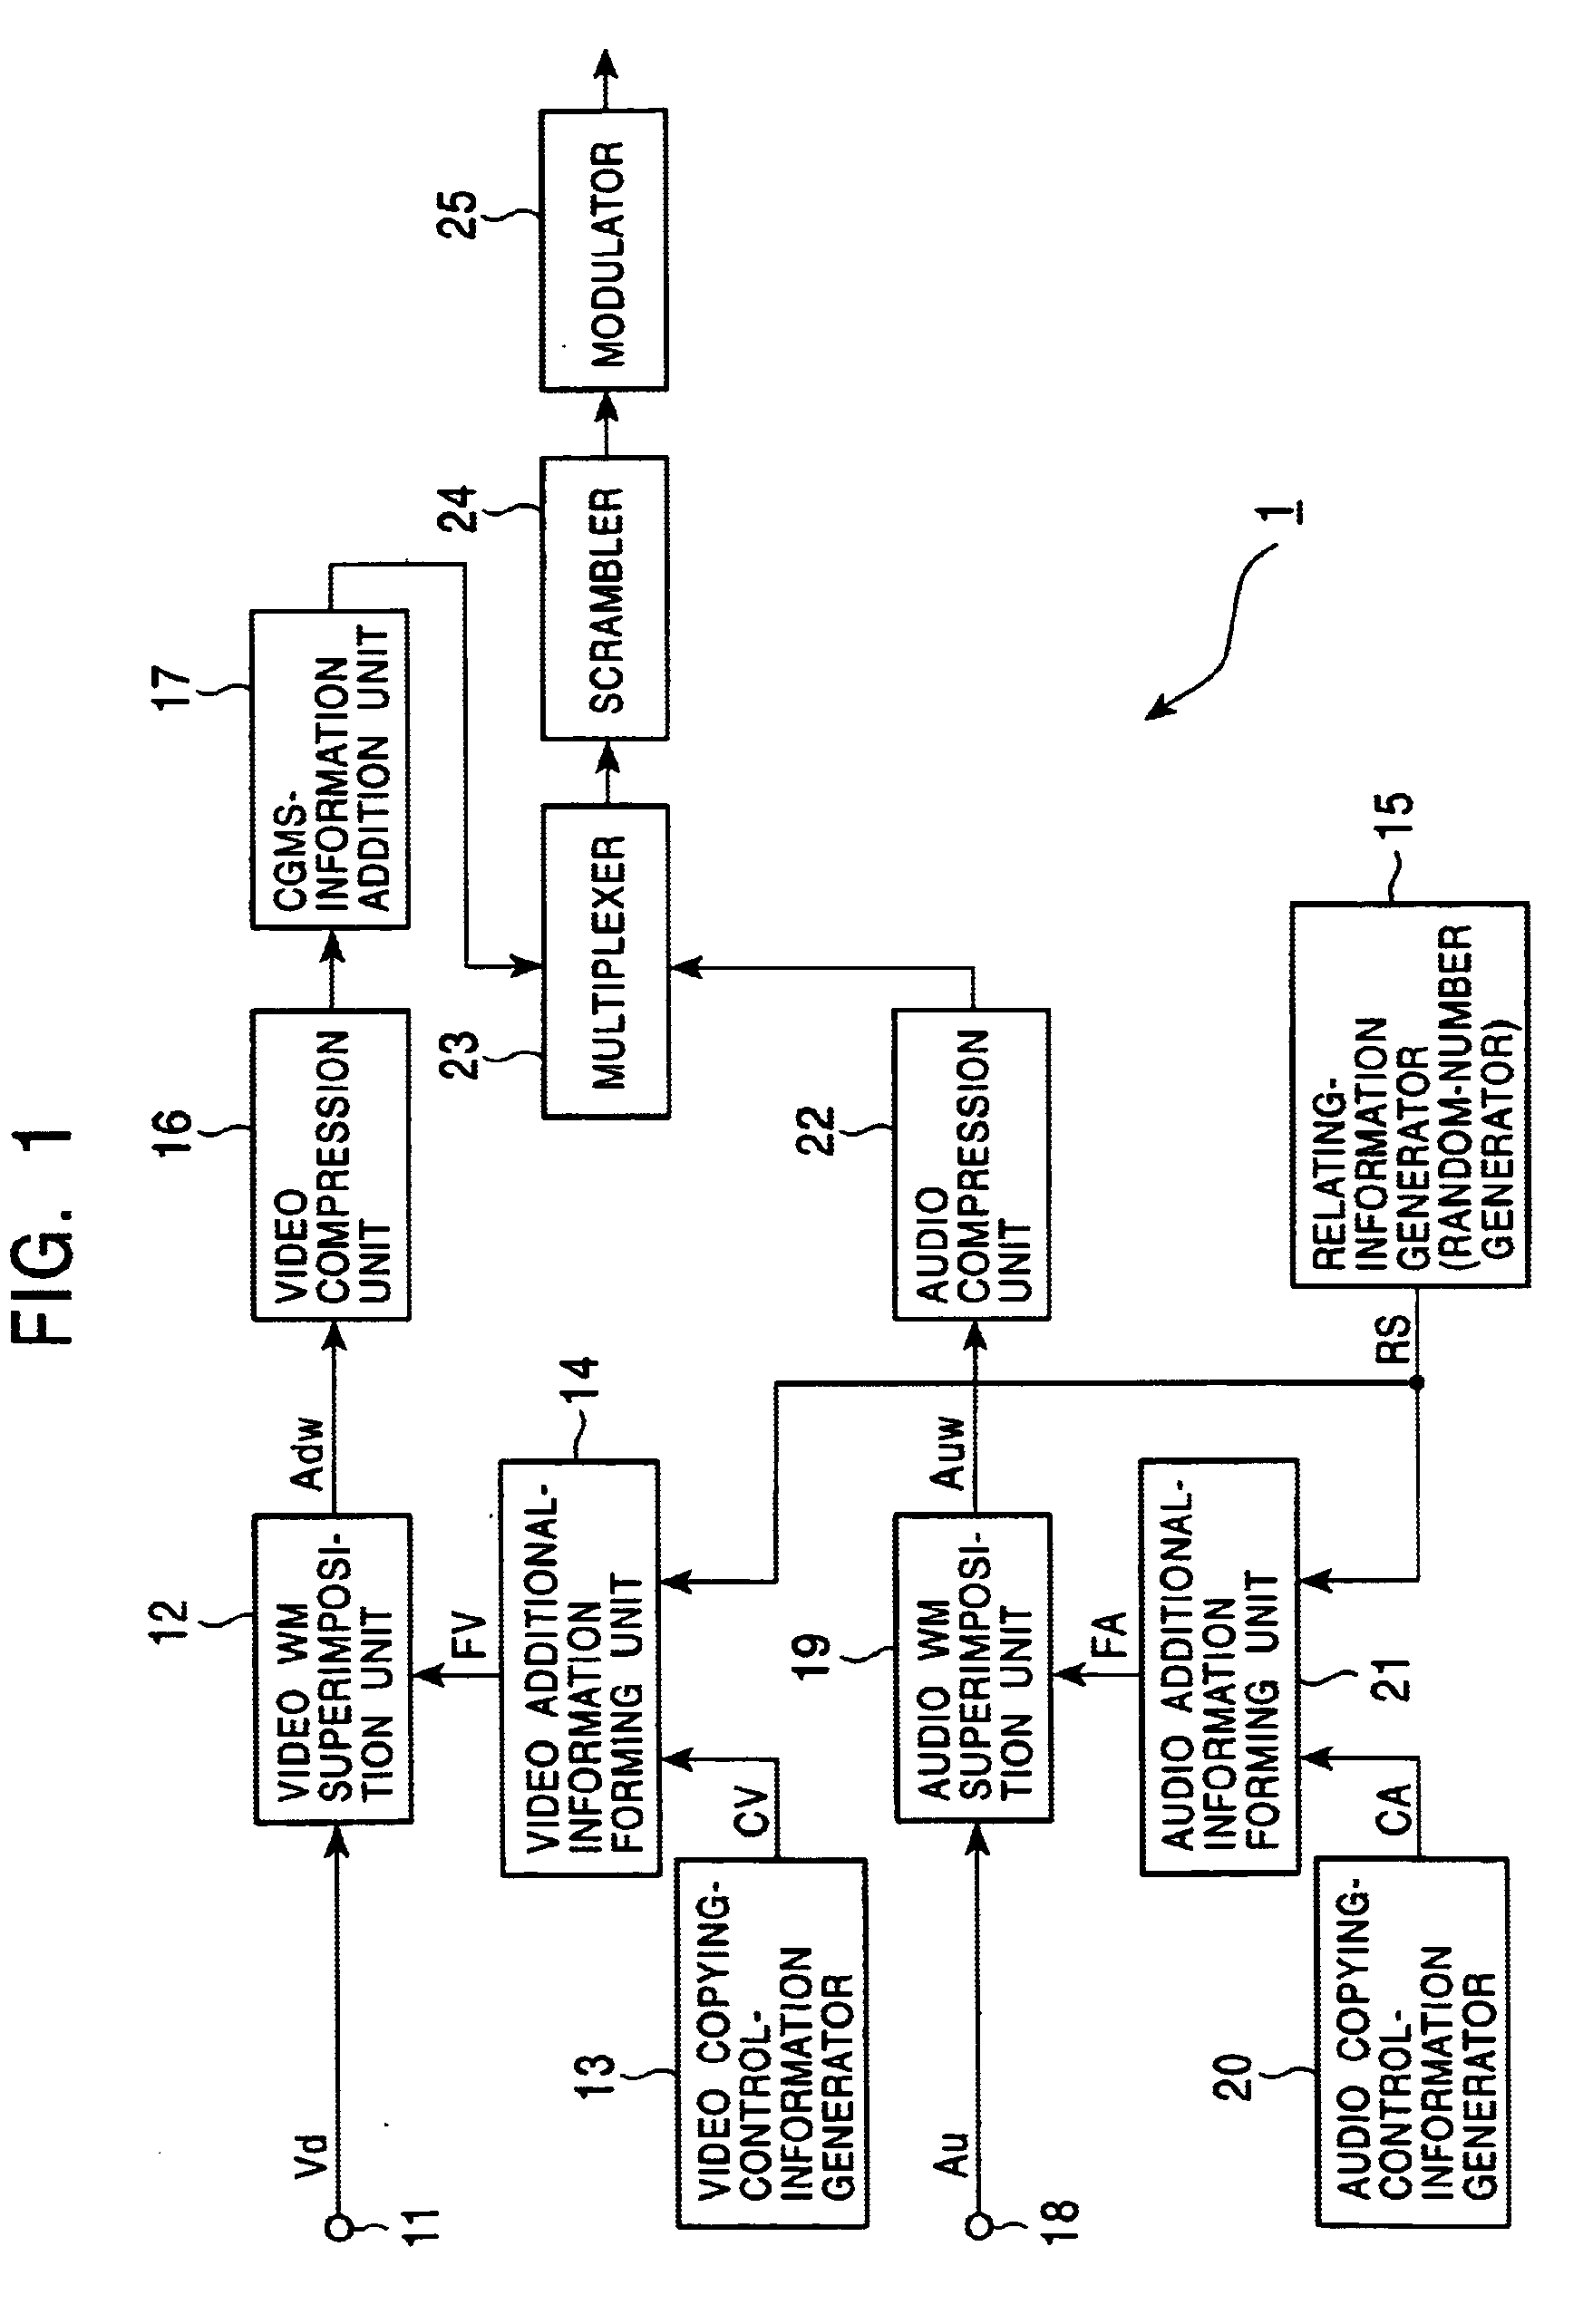 Copyright protection method, information signal processing system, information signal output apparatus, information signal processing apparatus, information signal output method, information signal processing method, and information signal recording medium